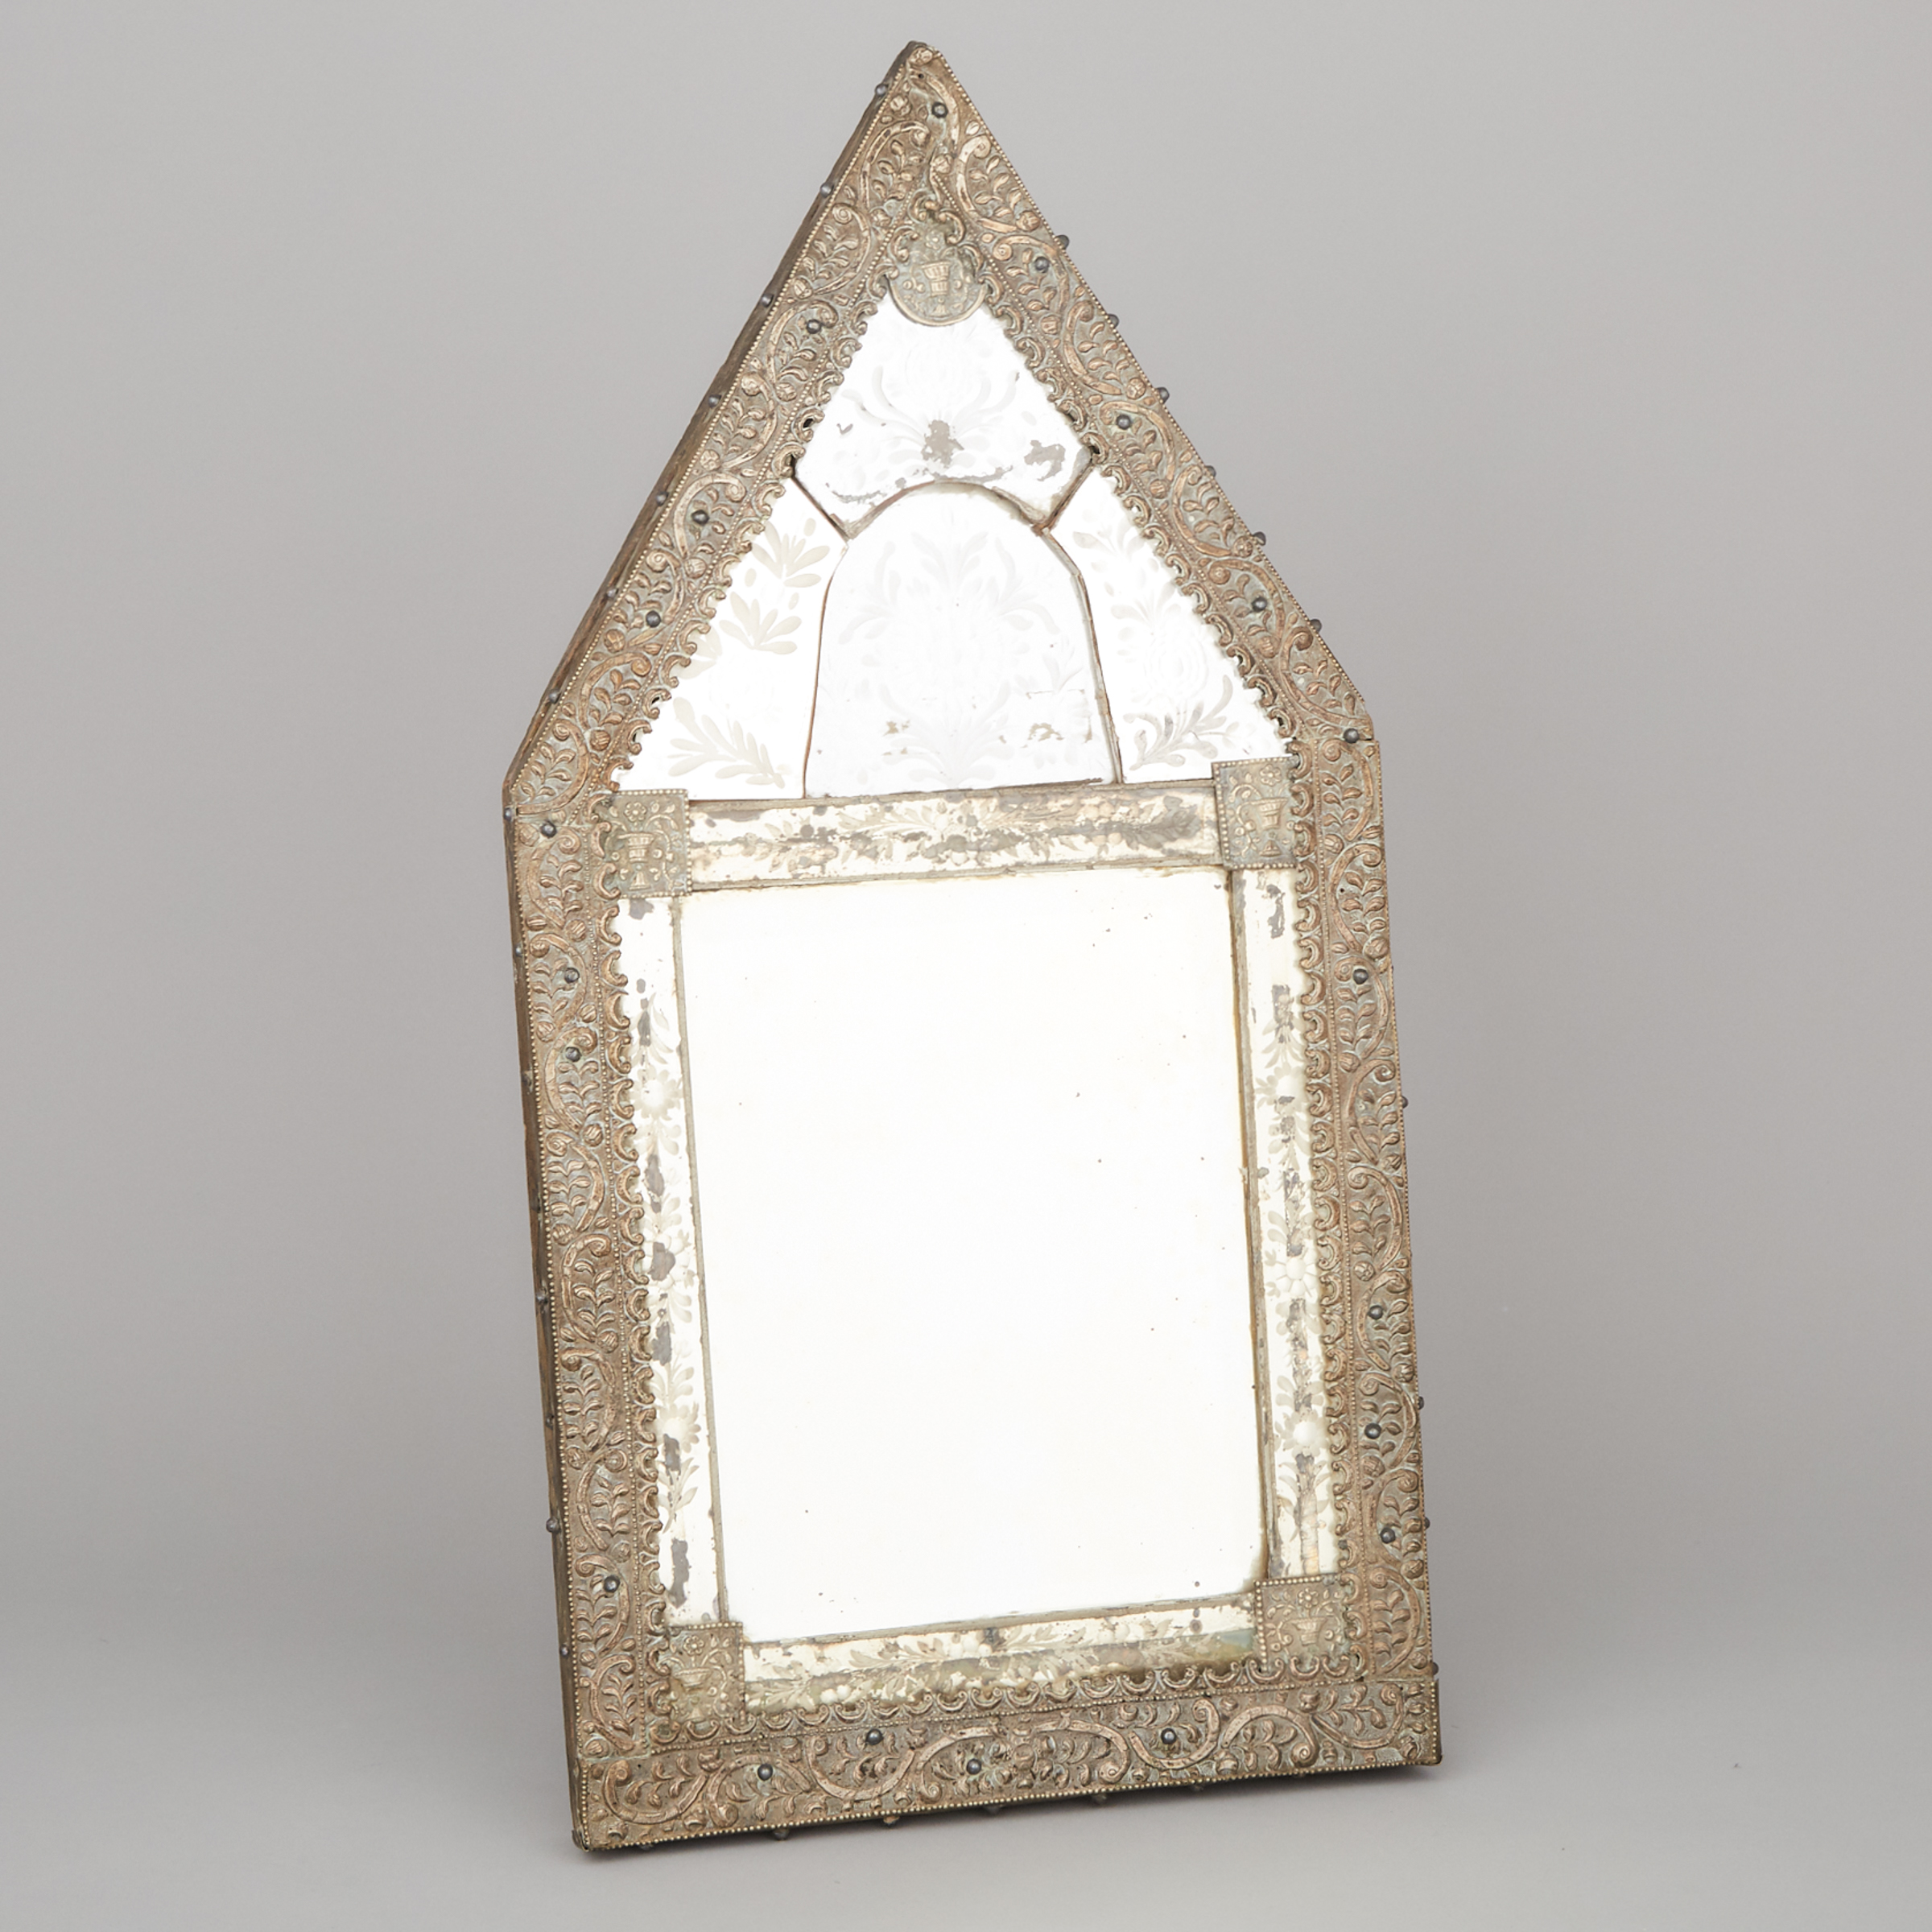 Italian Silver Mounted Etched Glass Easel Mirror, 17th century